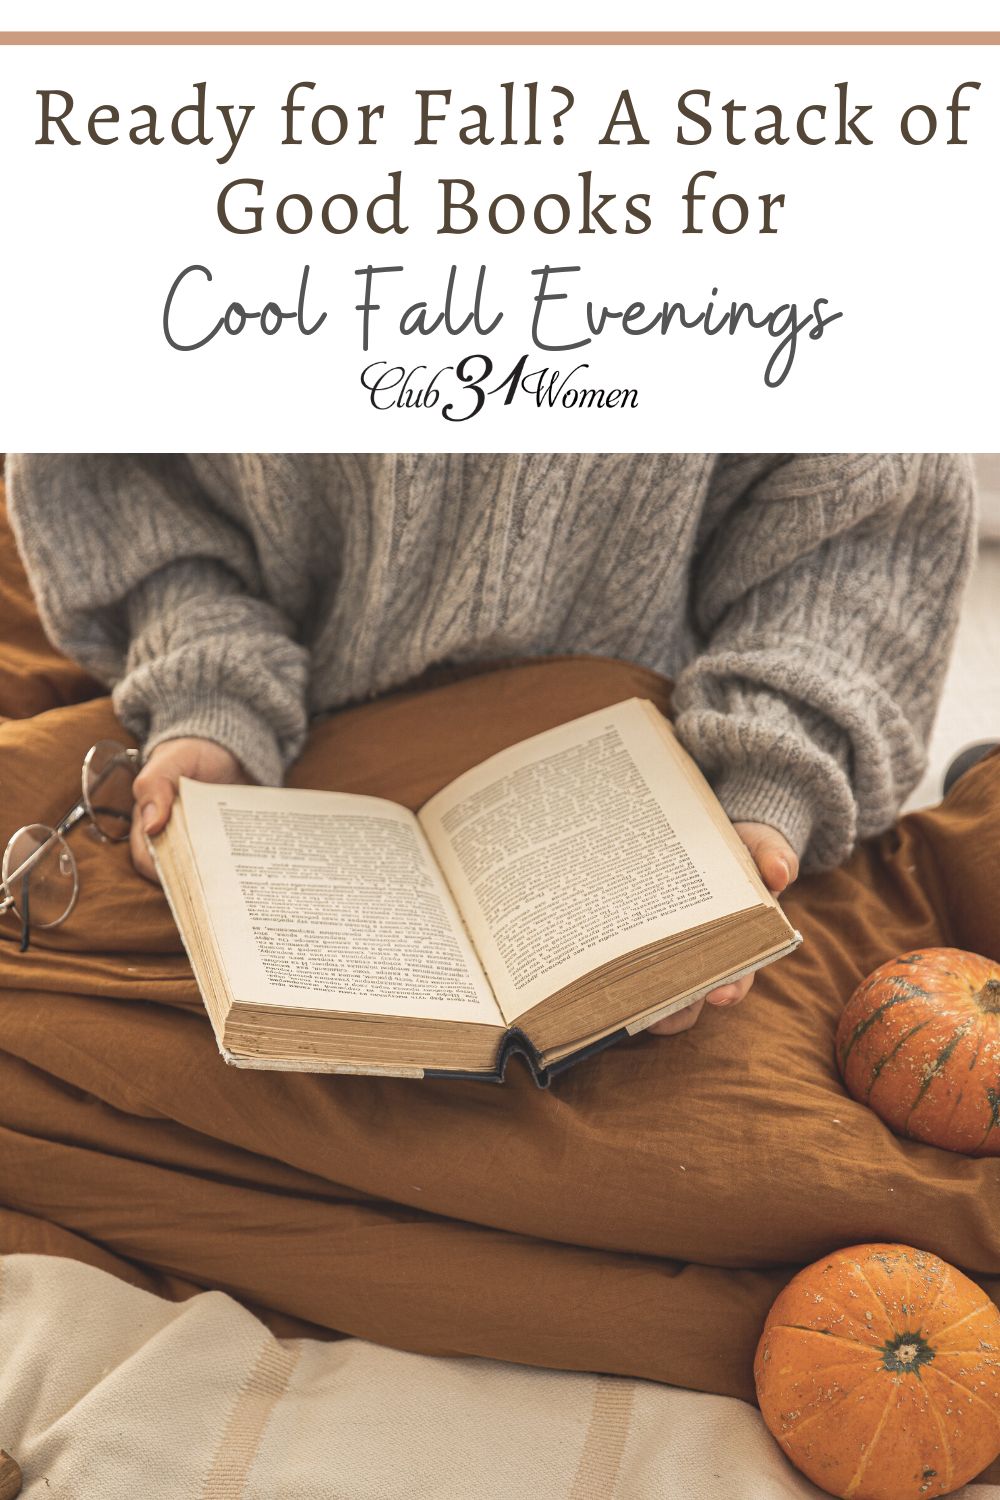 As the days get shorter, and we cuddle up under cozy blankets in the evenings, lets have a stack of books for autumn at our fingertips. via @Club31Women